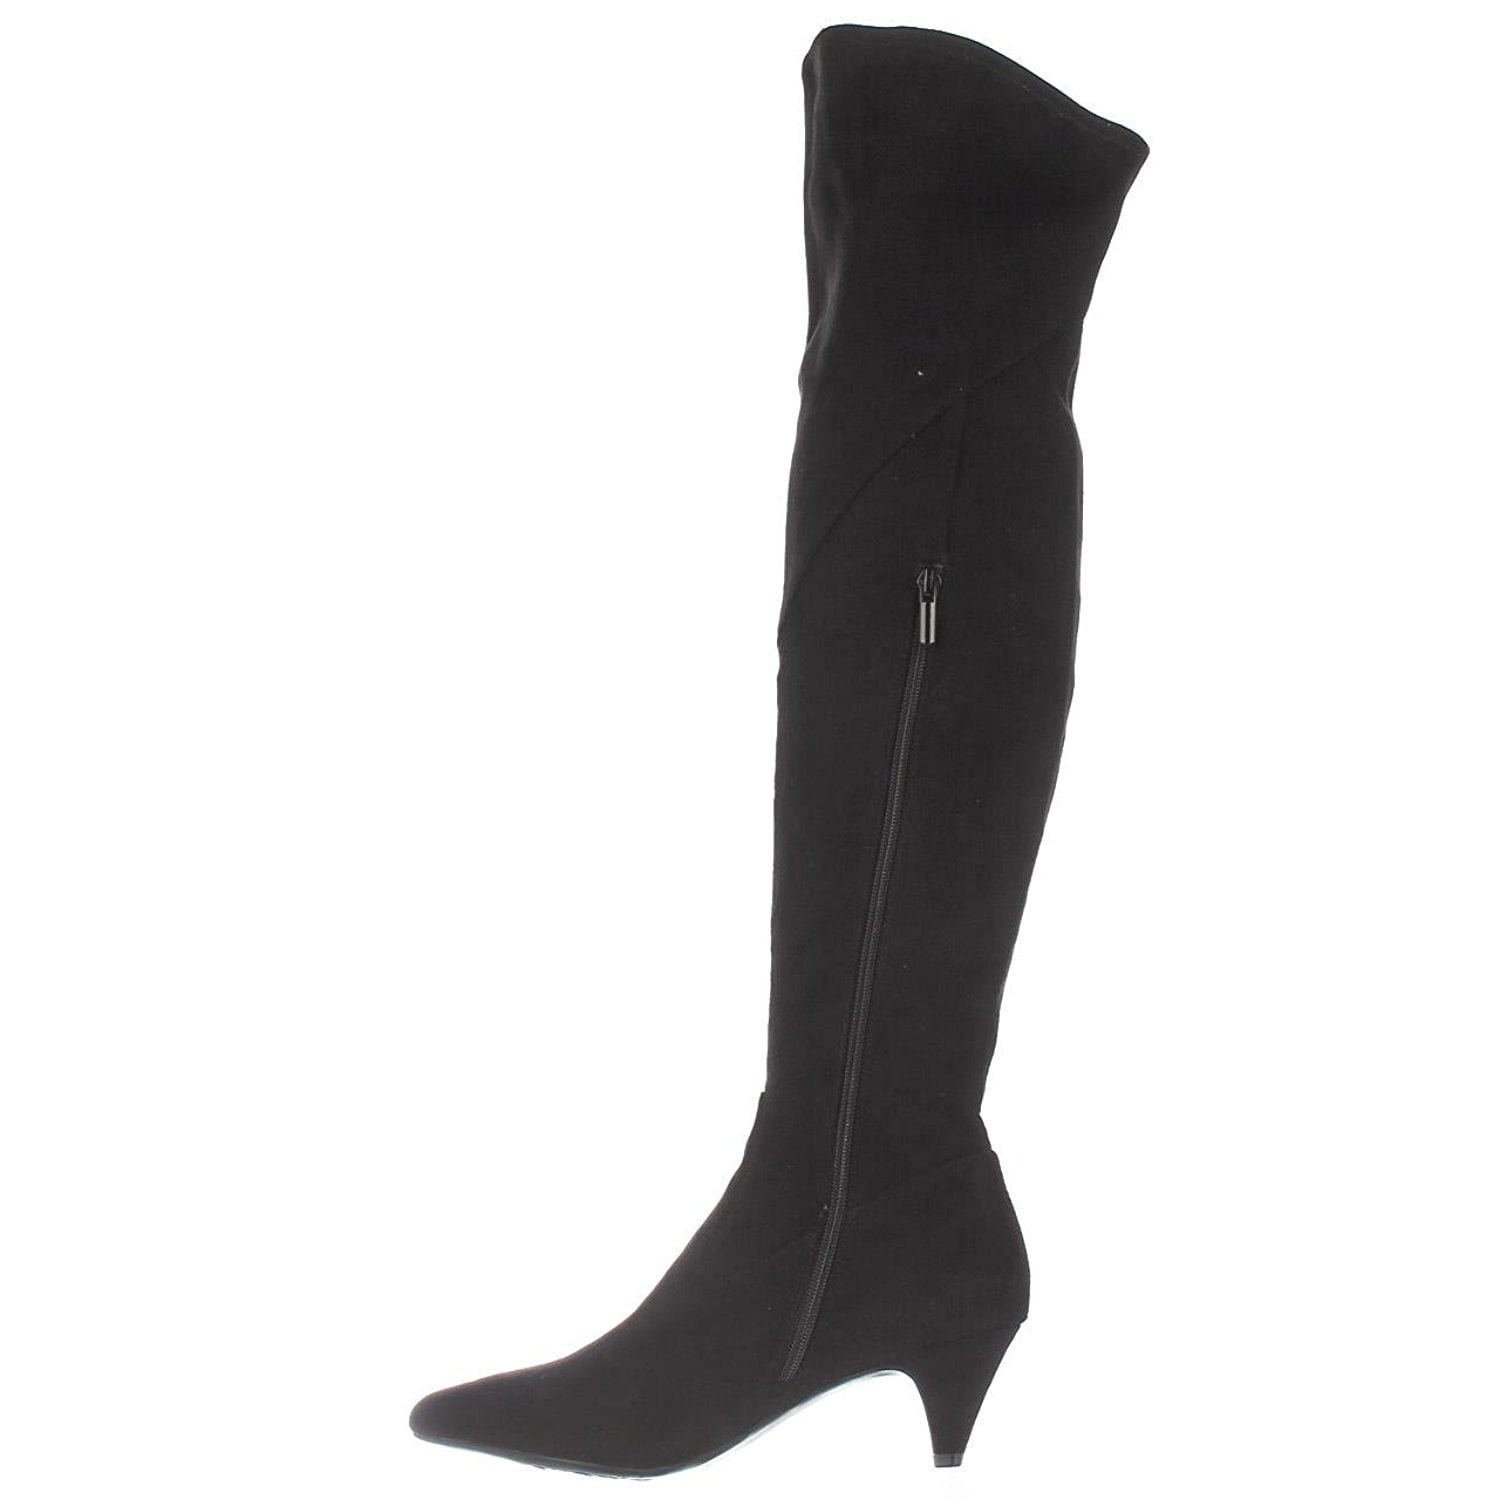 impo knee high boots